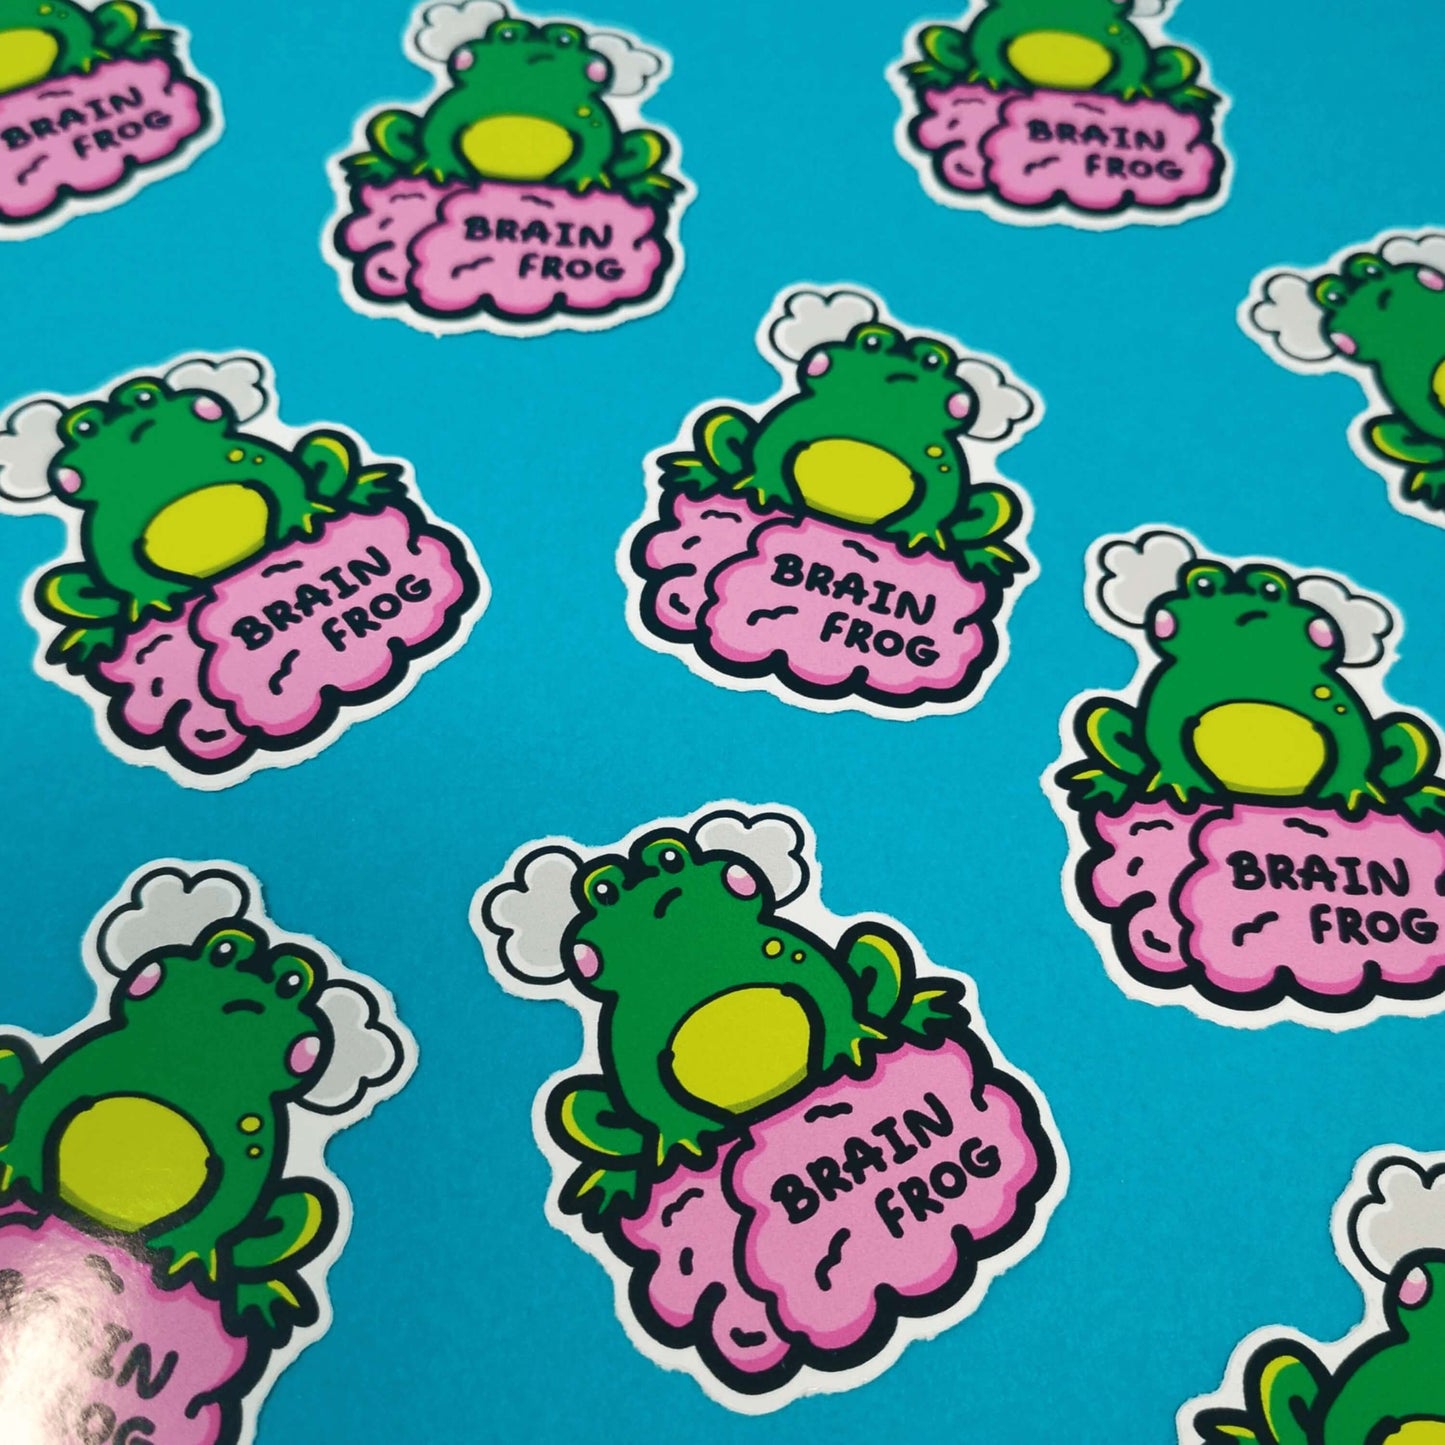 The Brain Frog Sticker - Brain Fog, multiple frog stickers on a blue background. The sticker is a confused frog with pink blush cheeks and two grey clouds above its head. Its sat on a pink brain with text that reads Brain Frog. The design was created to raise awareness for brain fog.